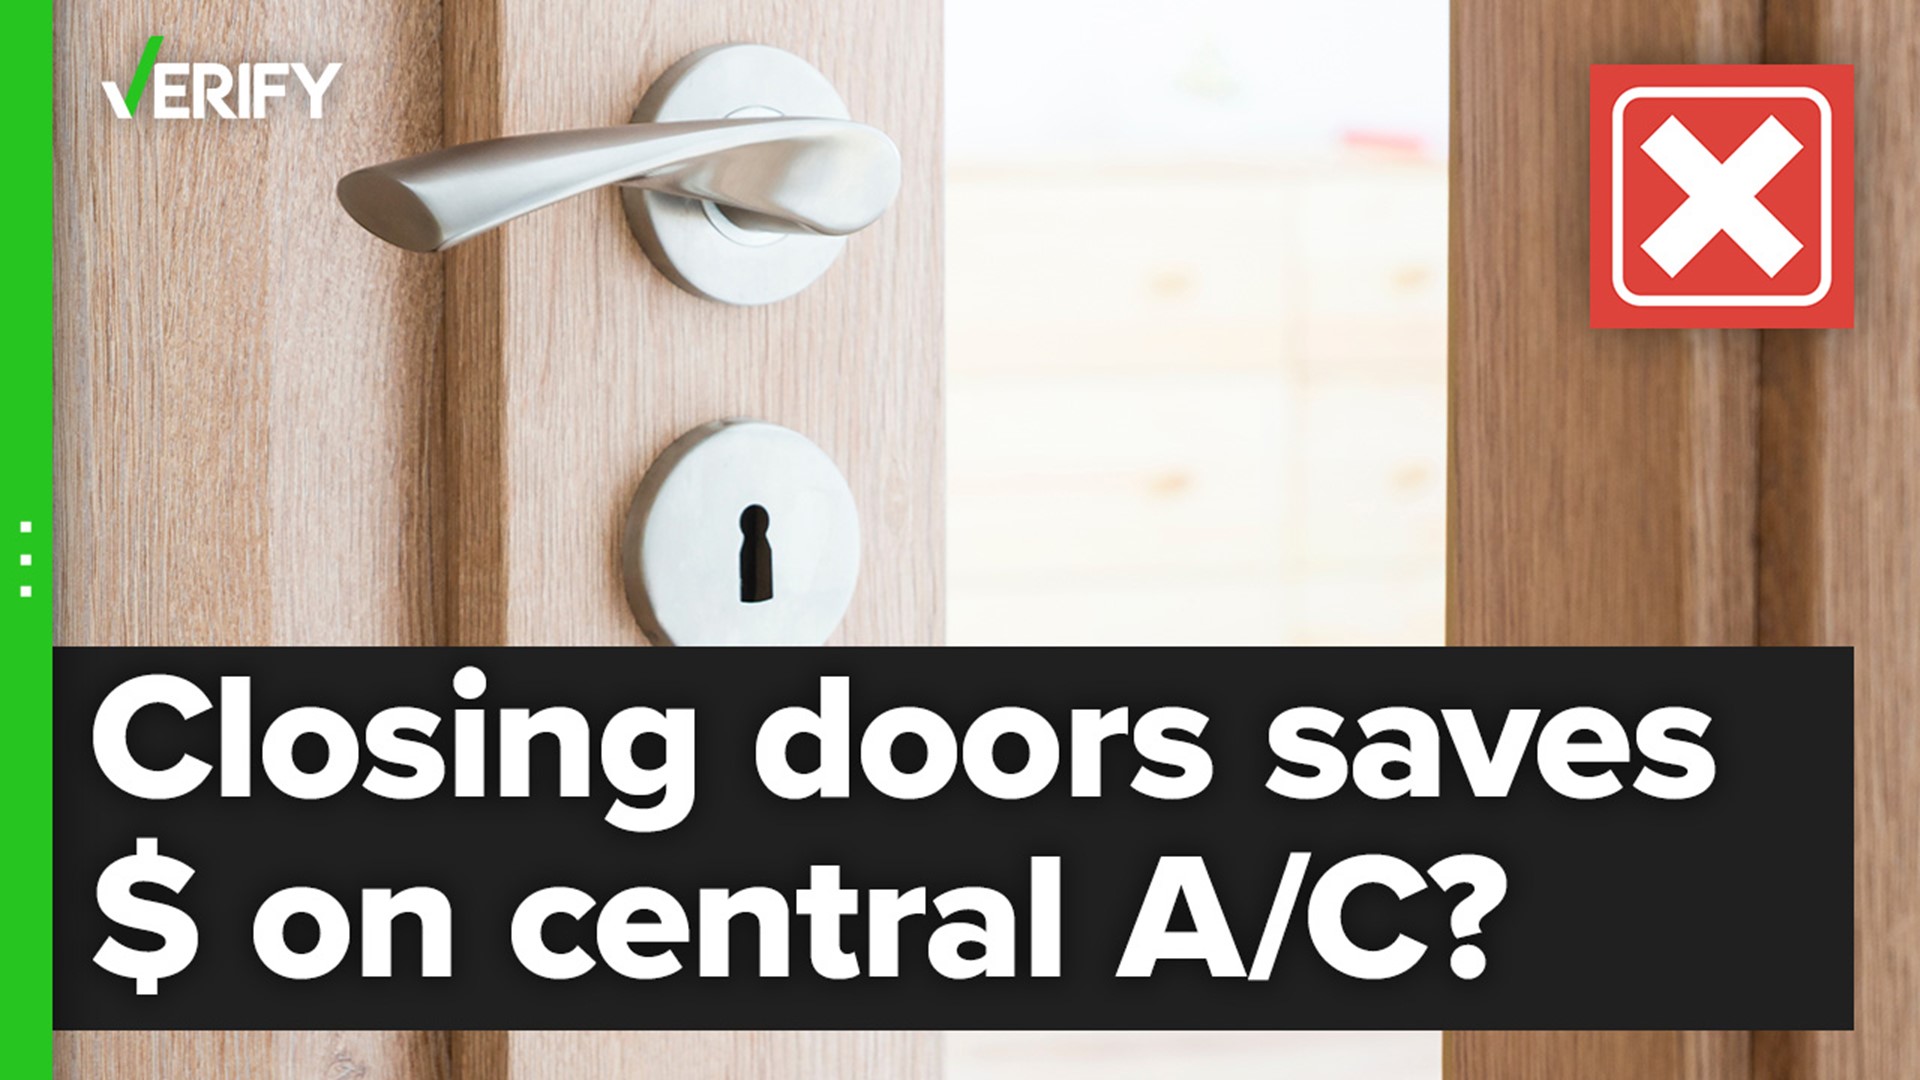 Closing bedroom doors actually puts strain on most central A/C systems, which in turn leads to more expensive utility bills.